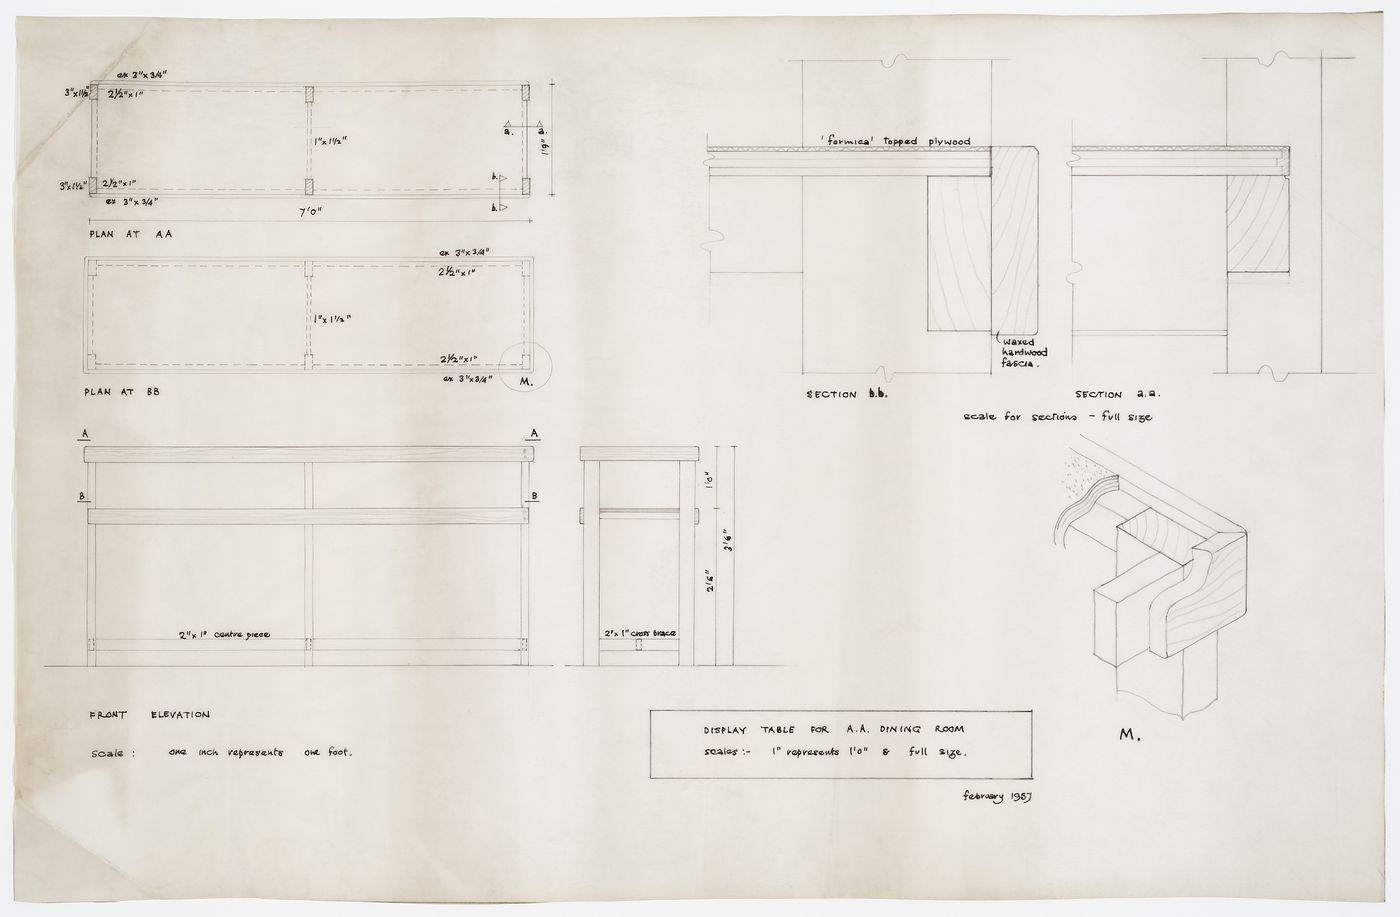 Plans, elevations and sections for display table for Architectural Association dining room